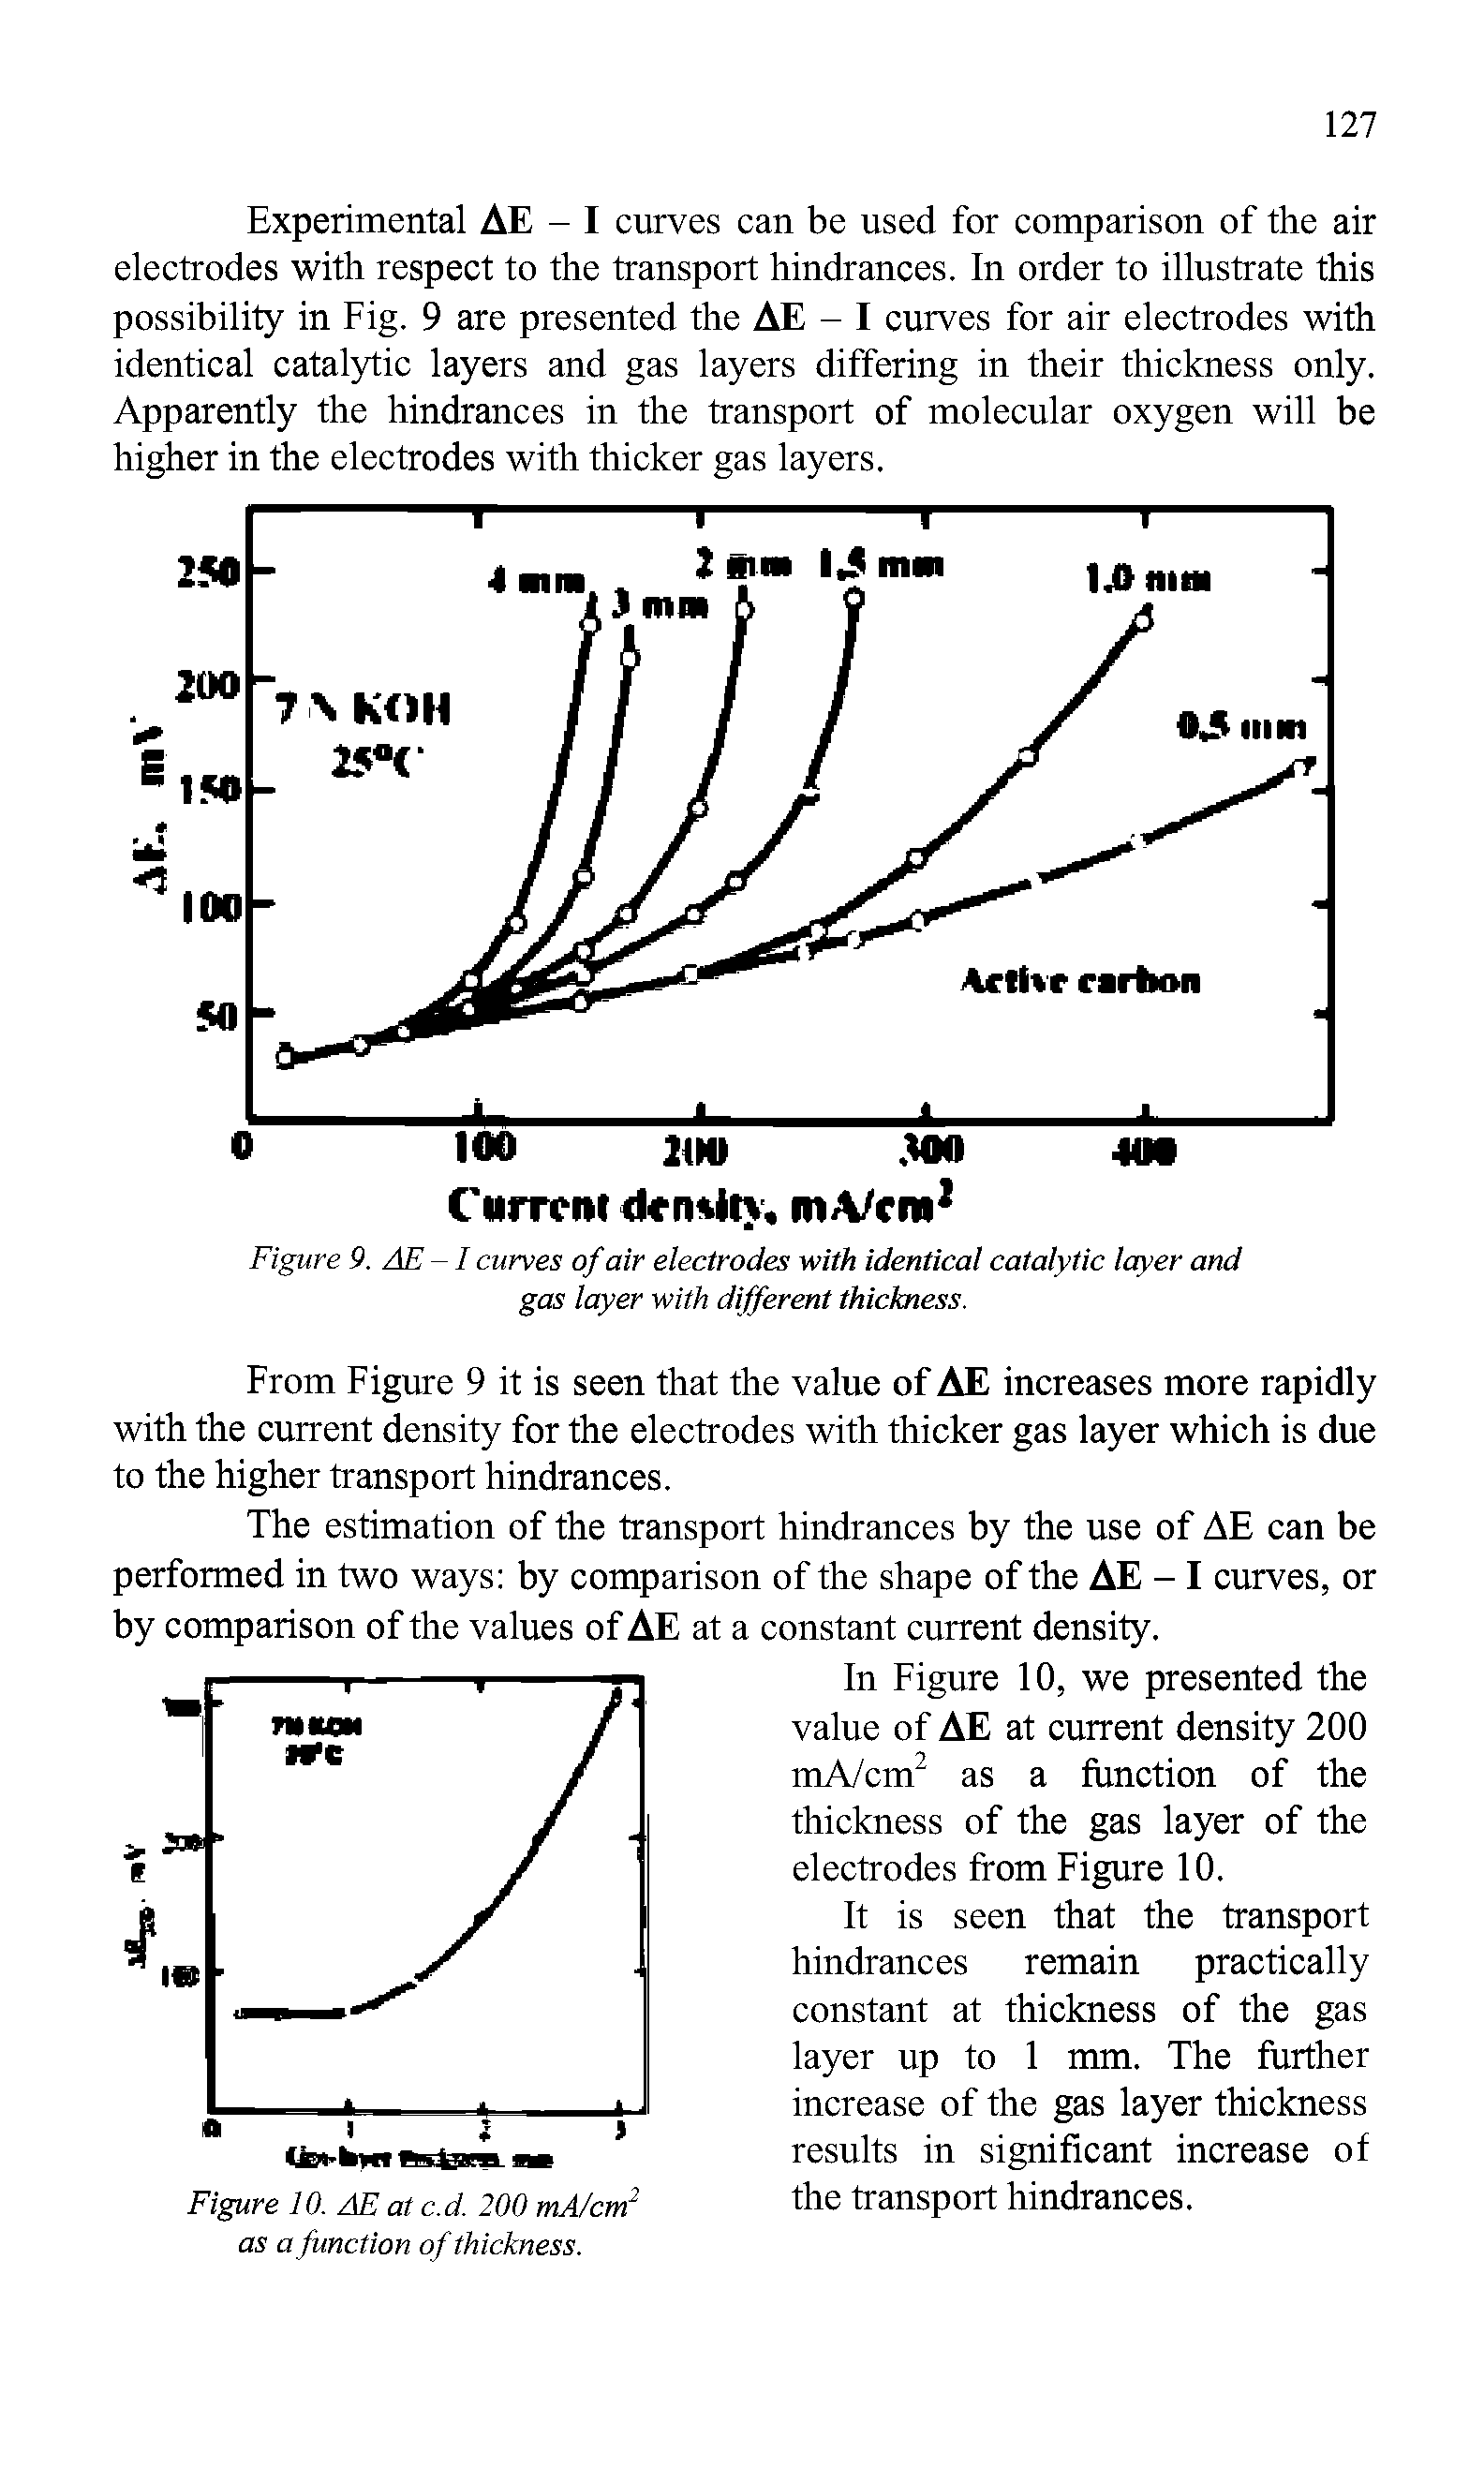 Figure 9. AE -1 curves of air electrodes with identical catalytic layer and gas layer with different thickness.